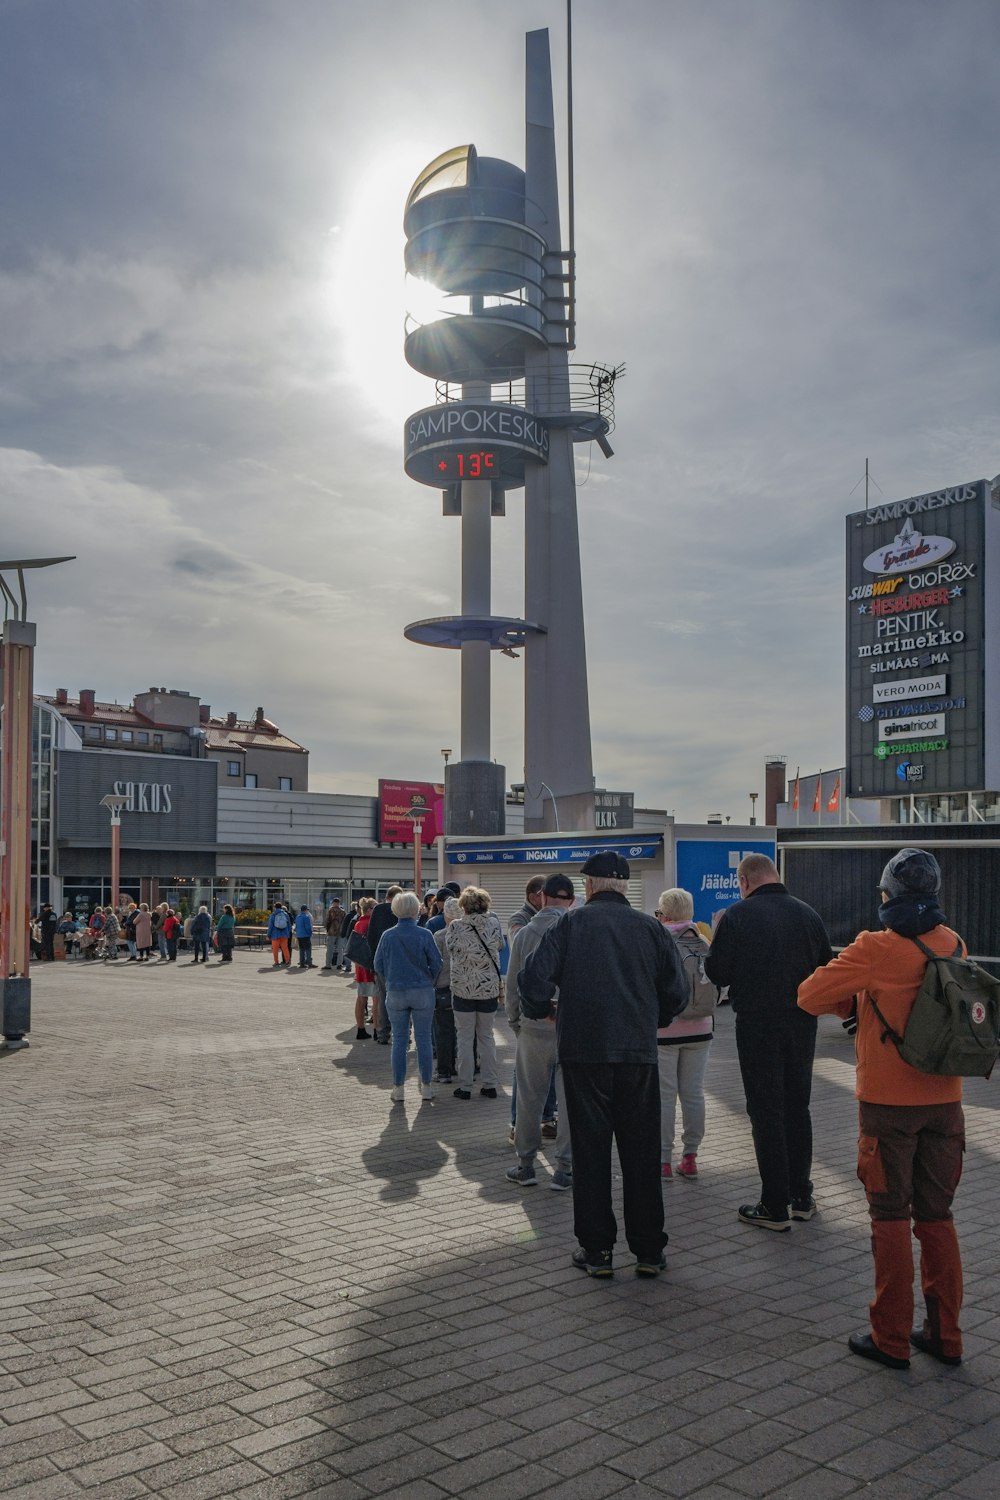 a group of people standing around a tall tower